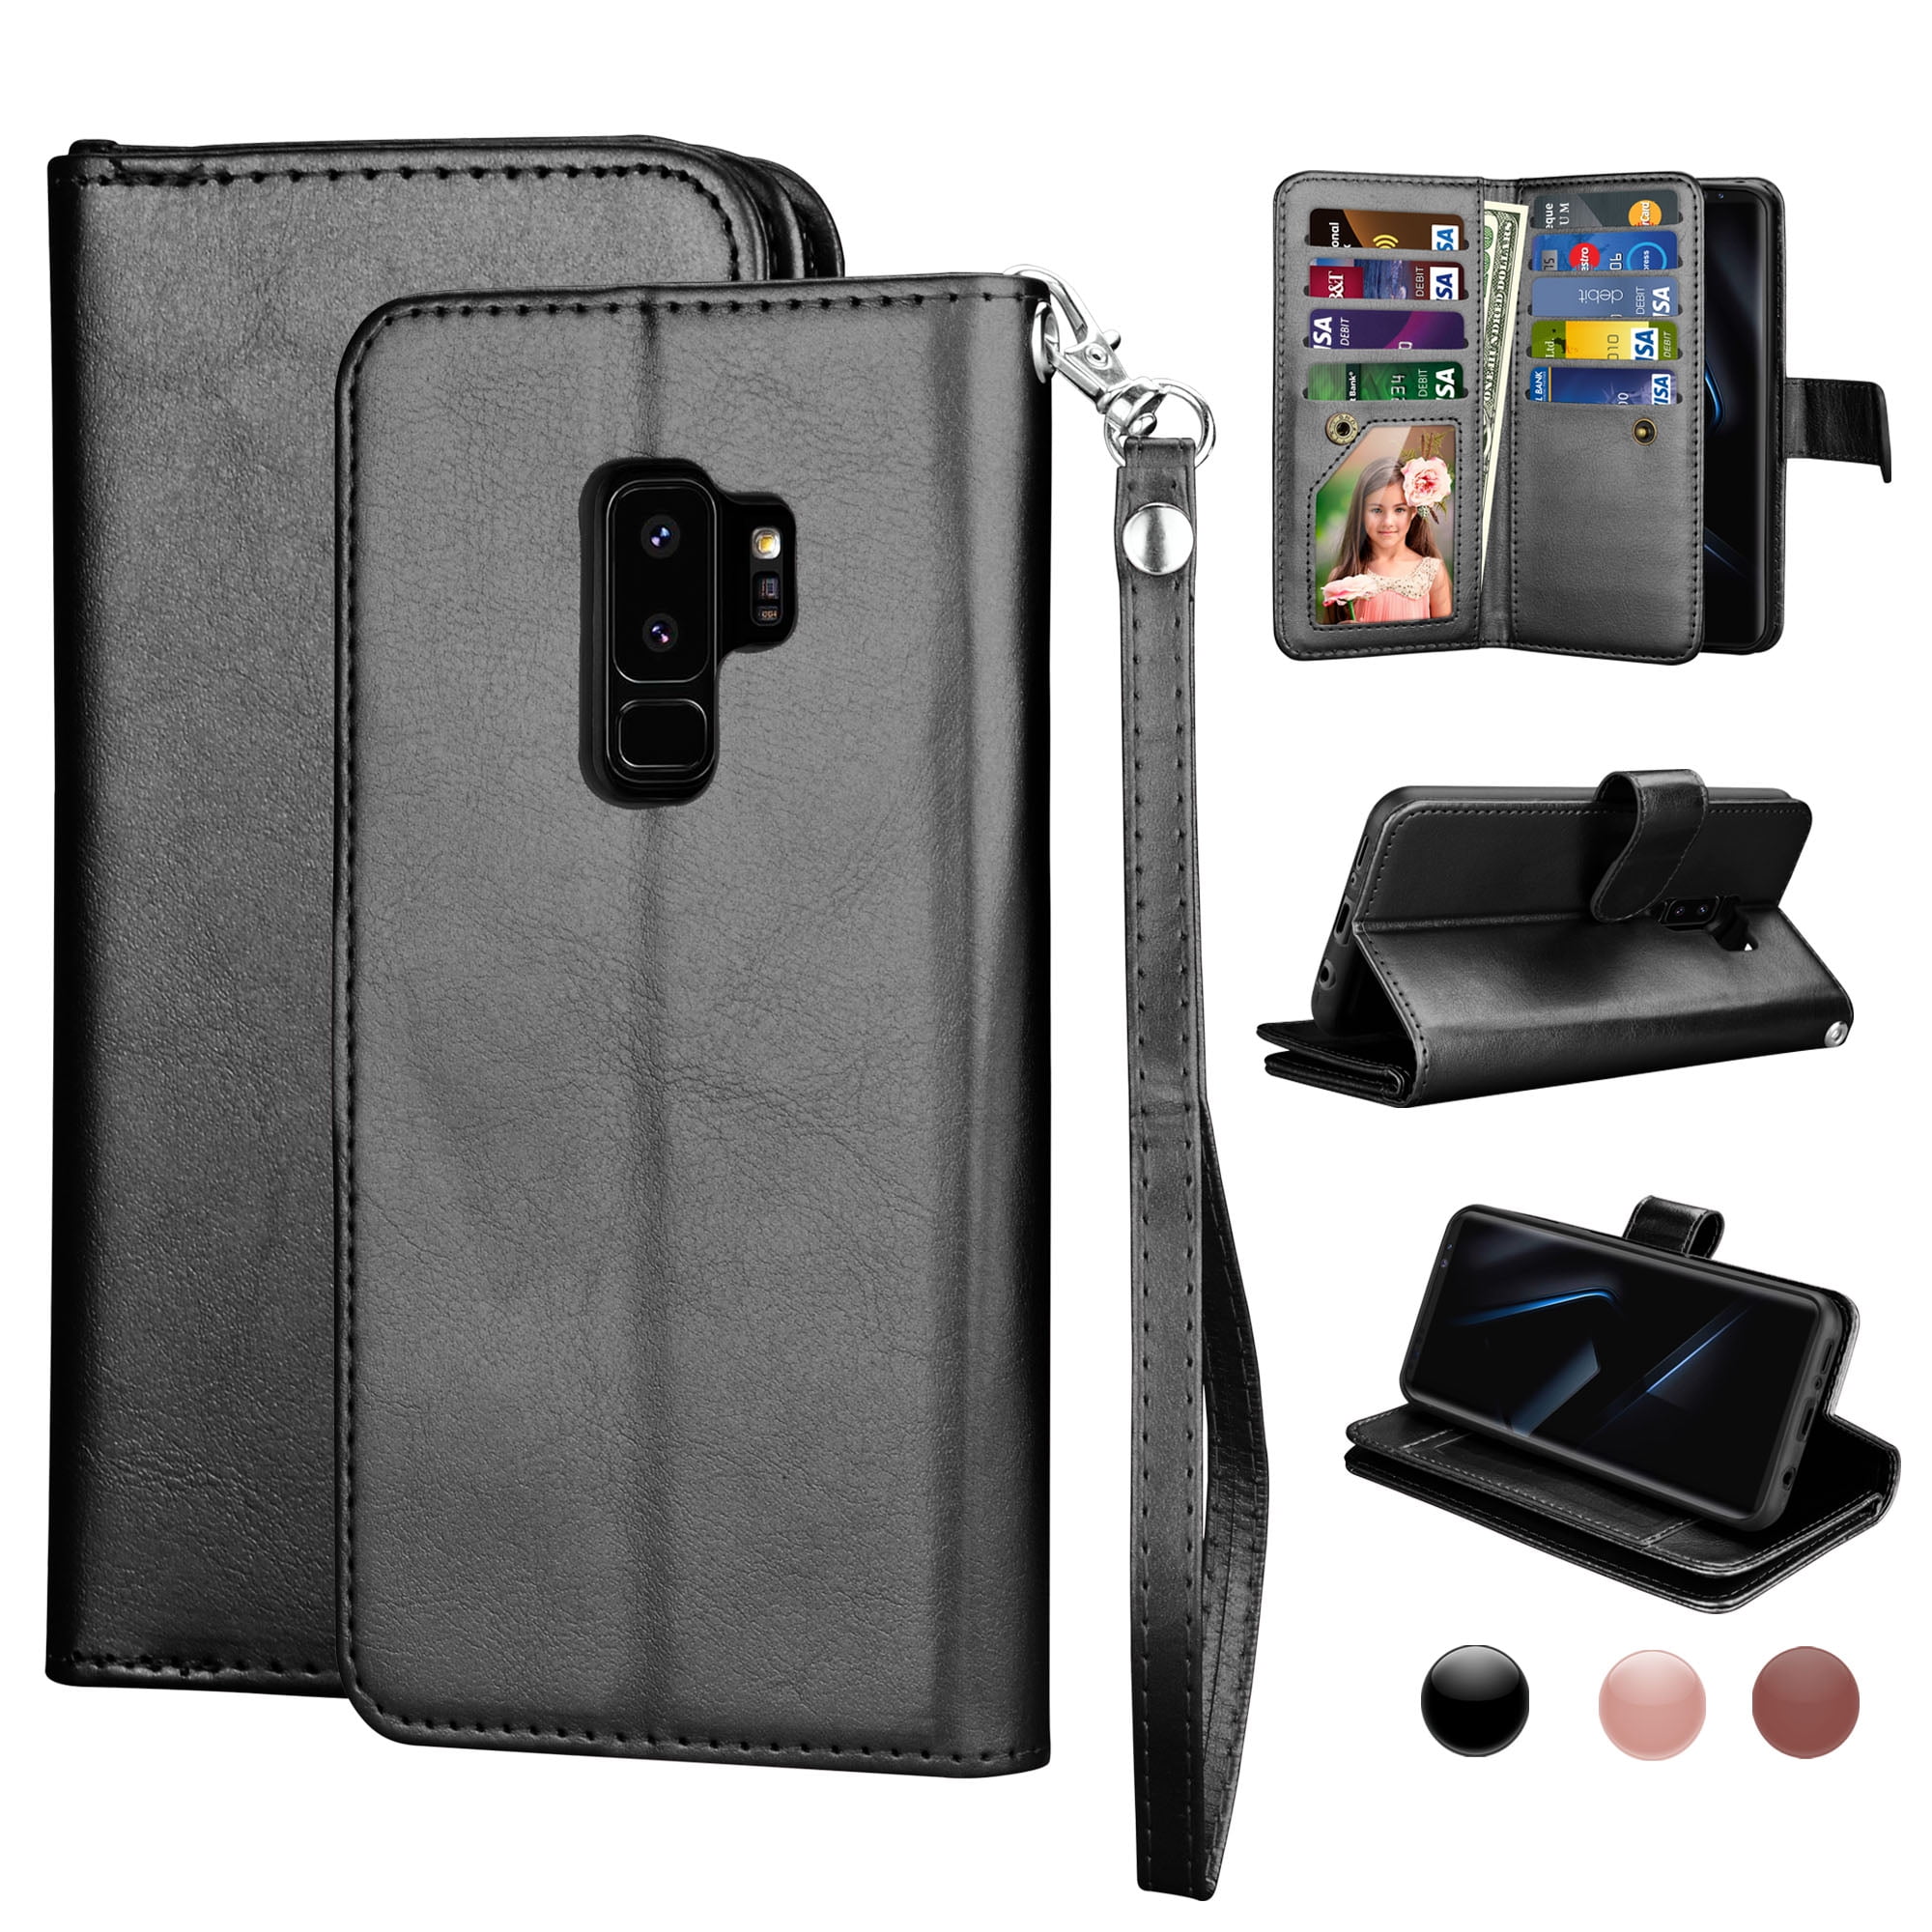 Samsung Galaxy S10 Flip Case Cover for Leather Kickstand Wallet case Luxury Business Card Holders Flip Cover 